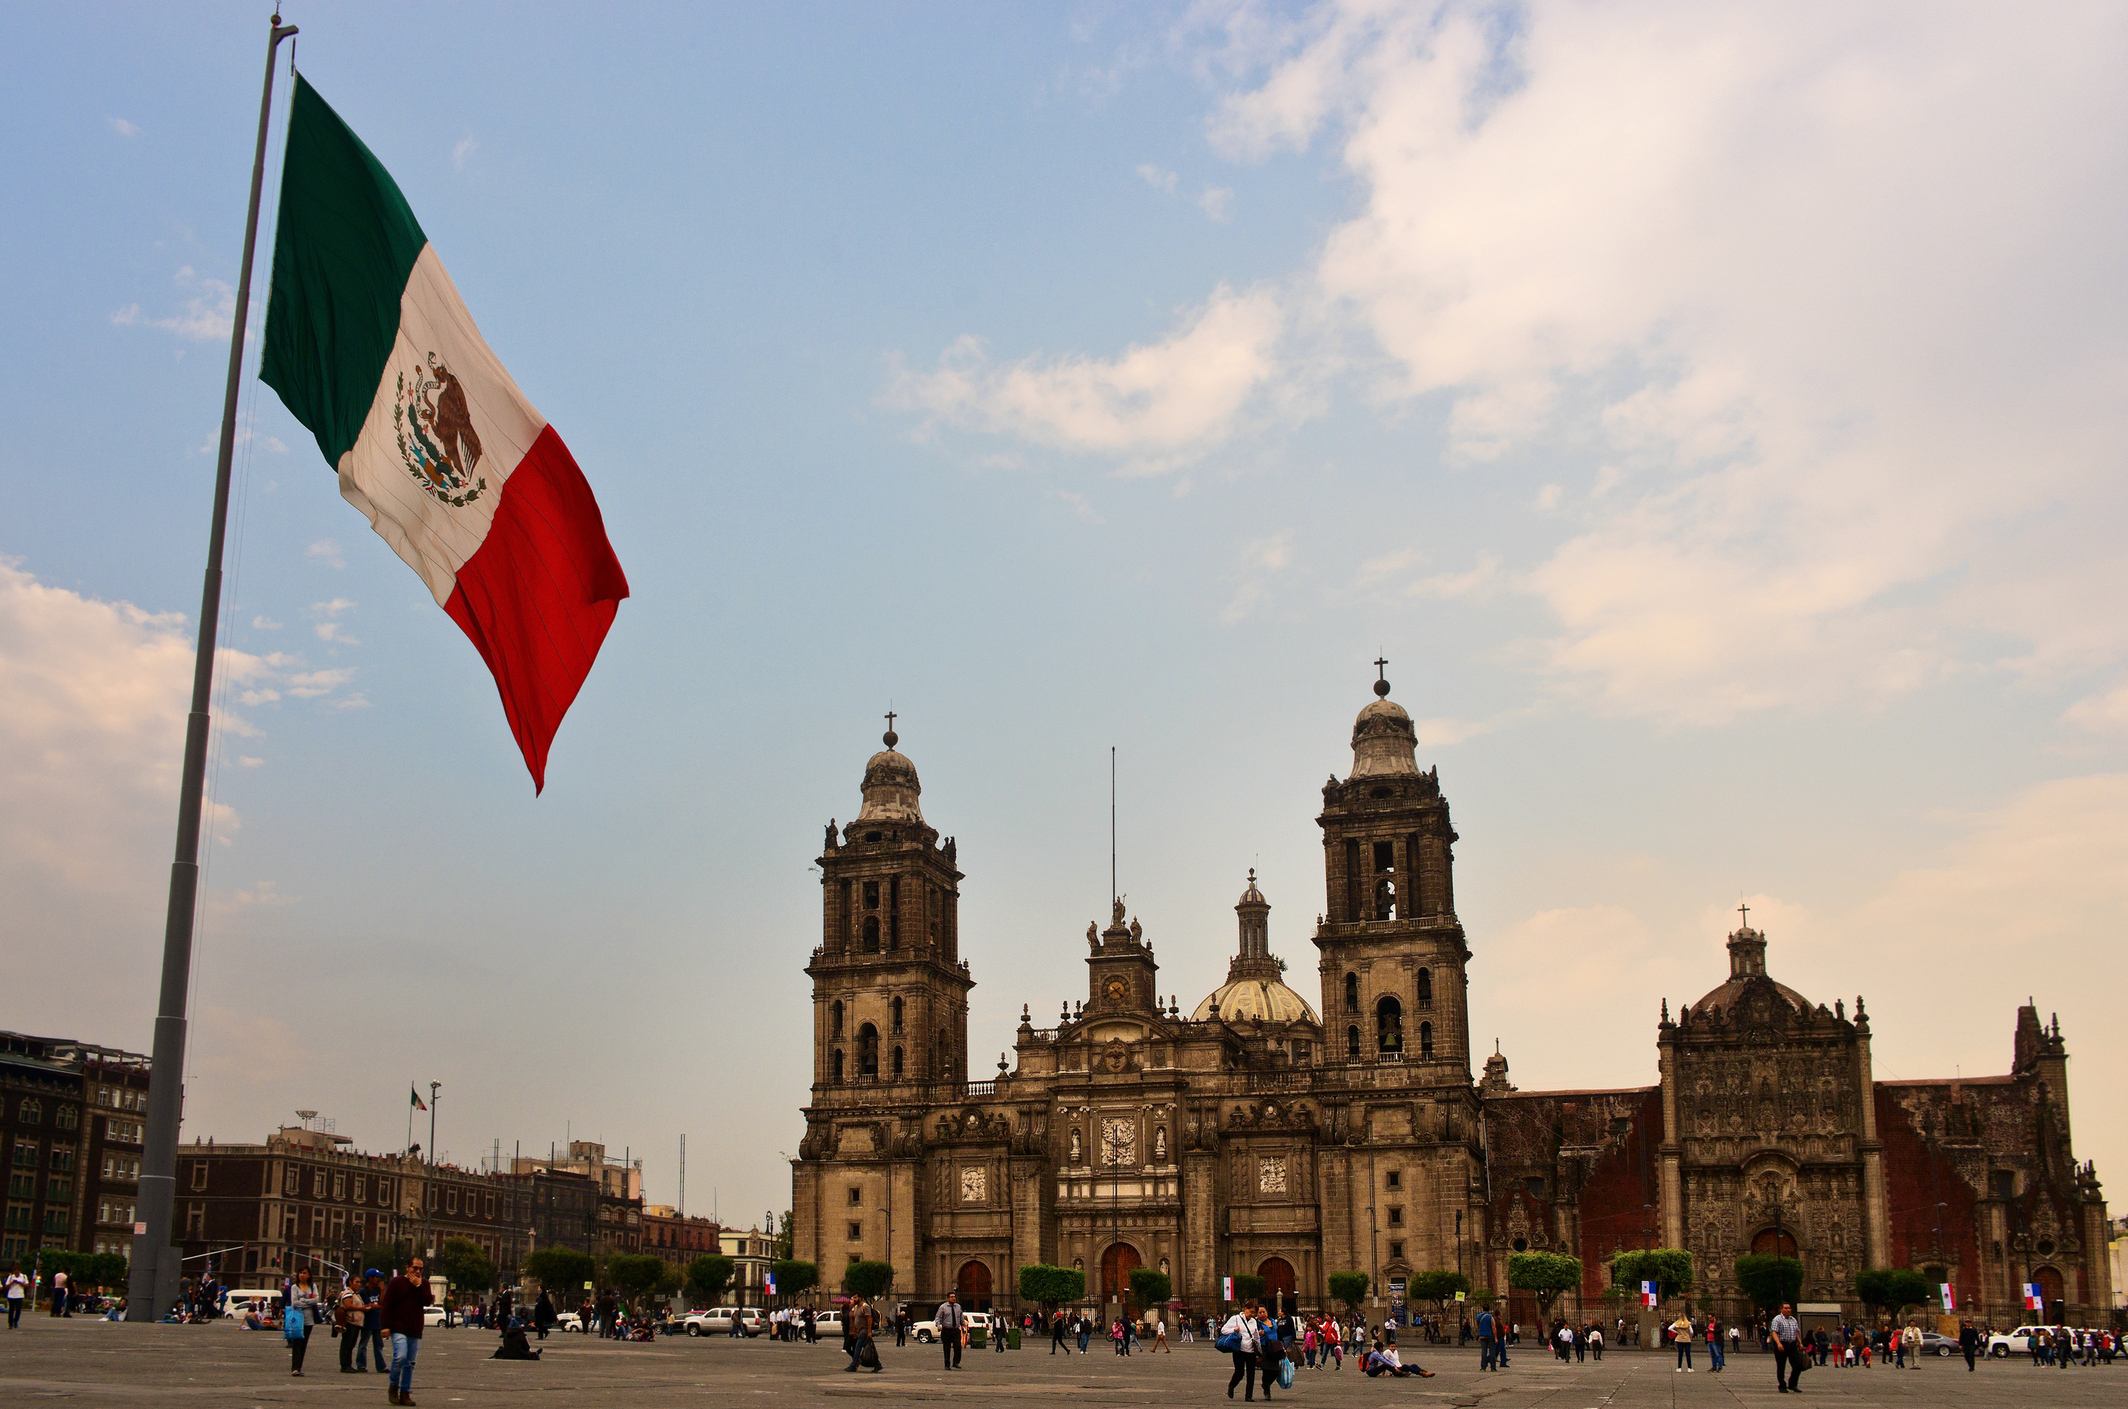 Zocalo, Mexico City (Getty Images)